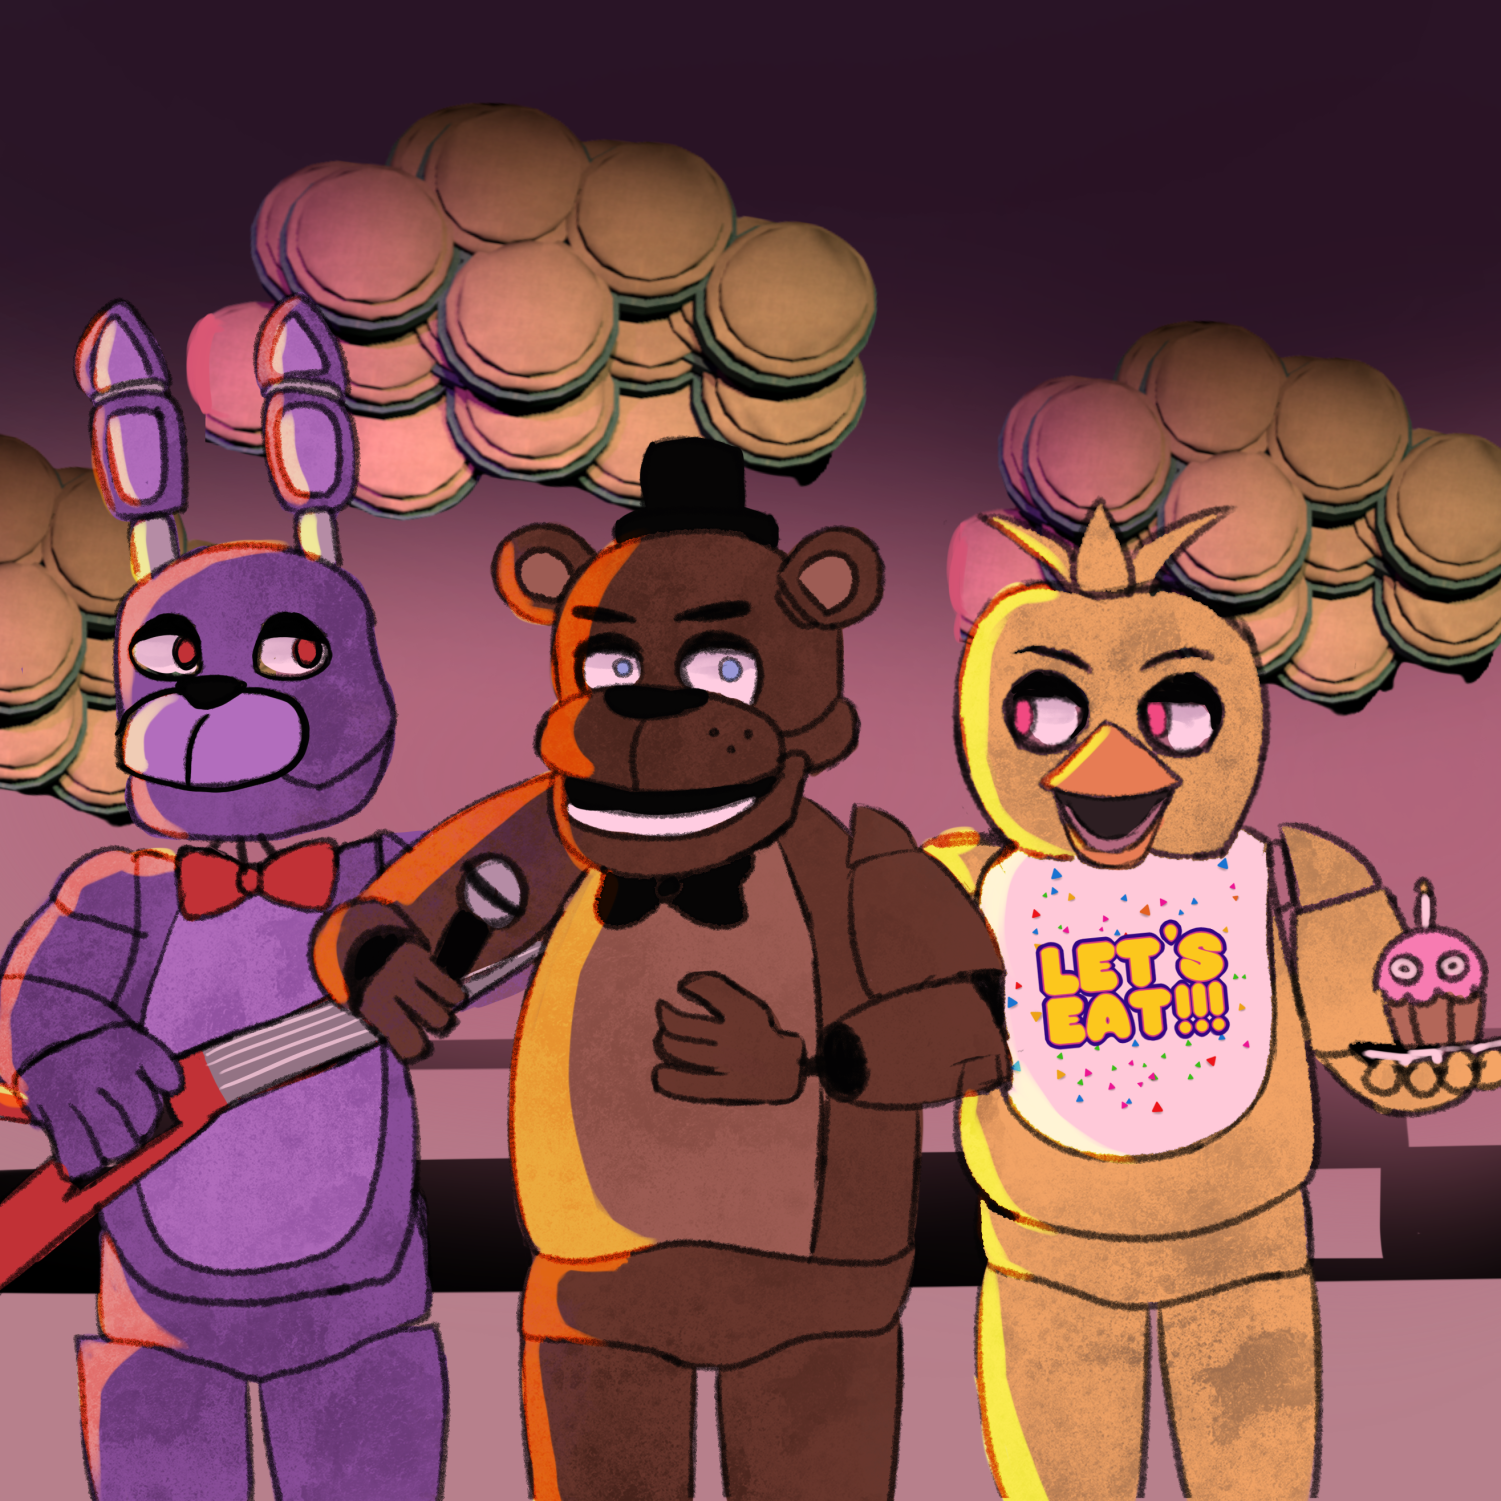 IT'S US! - (Fan-Made Drawing Teaser Poster for the FNaF Movie). Hope y'all  like it - (Ft.: Golden Freddy, Evan Afton, and Abby Schmidt). :  r/fivenightsatfreddys